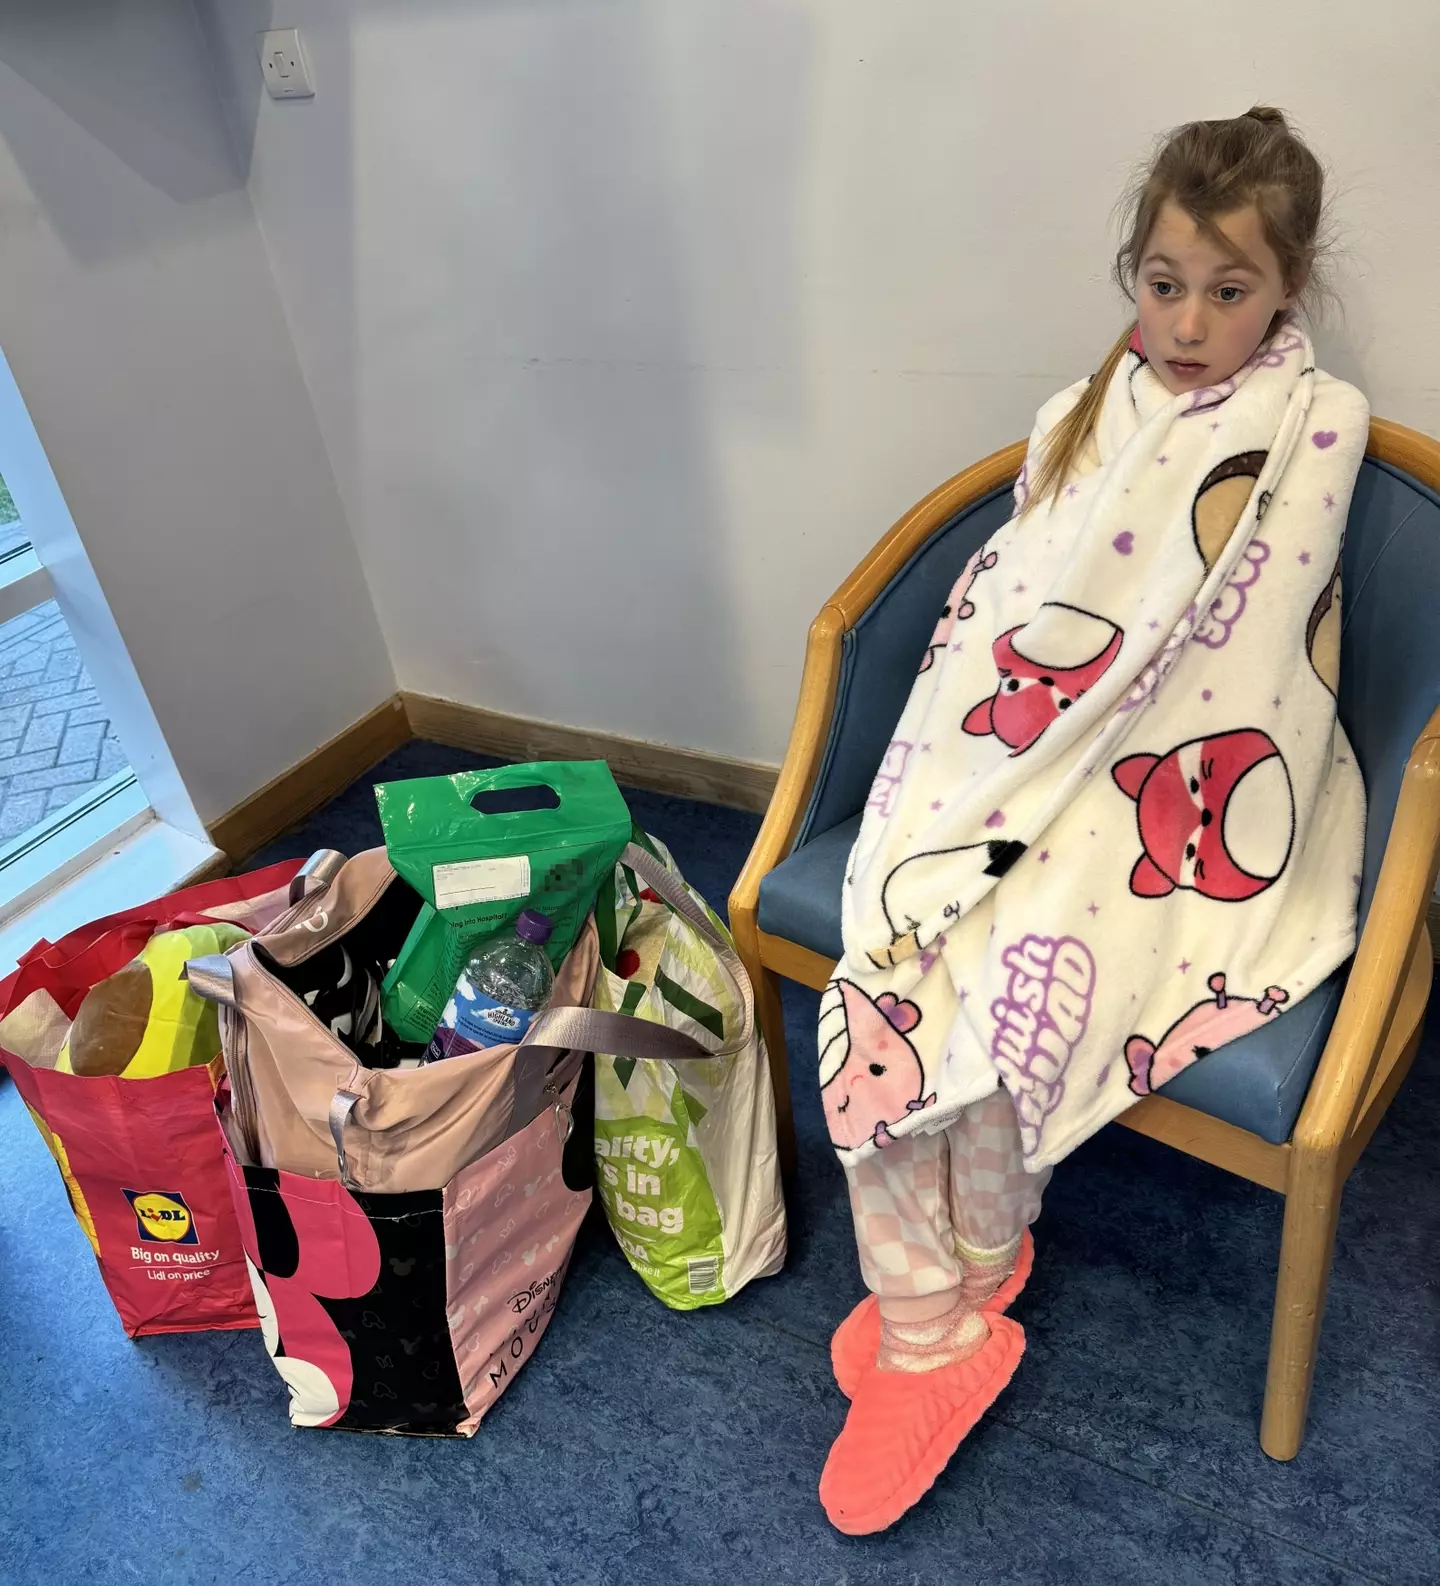 Mia-Rose spent three days in hospital. (Kennedy News and Media)